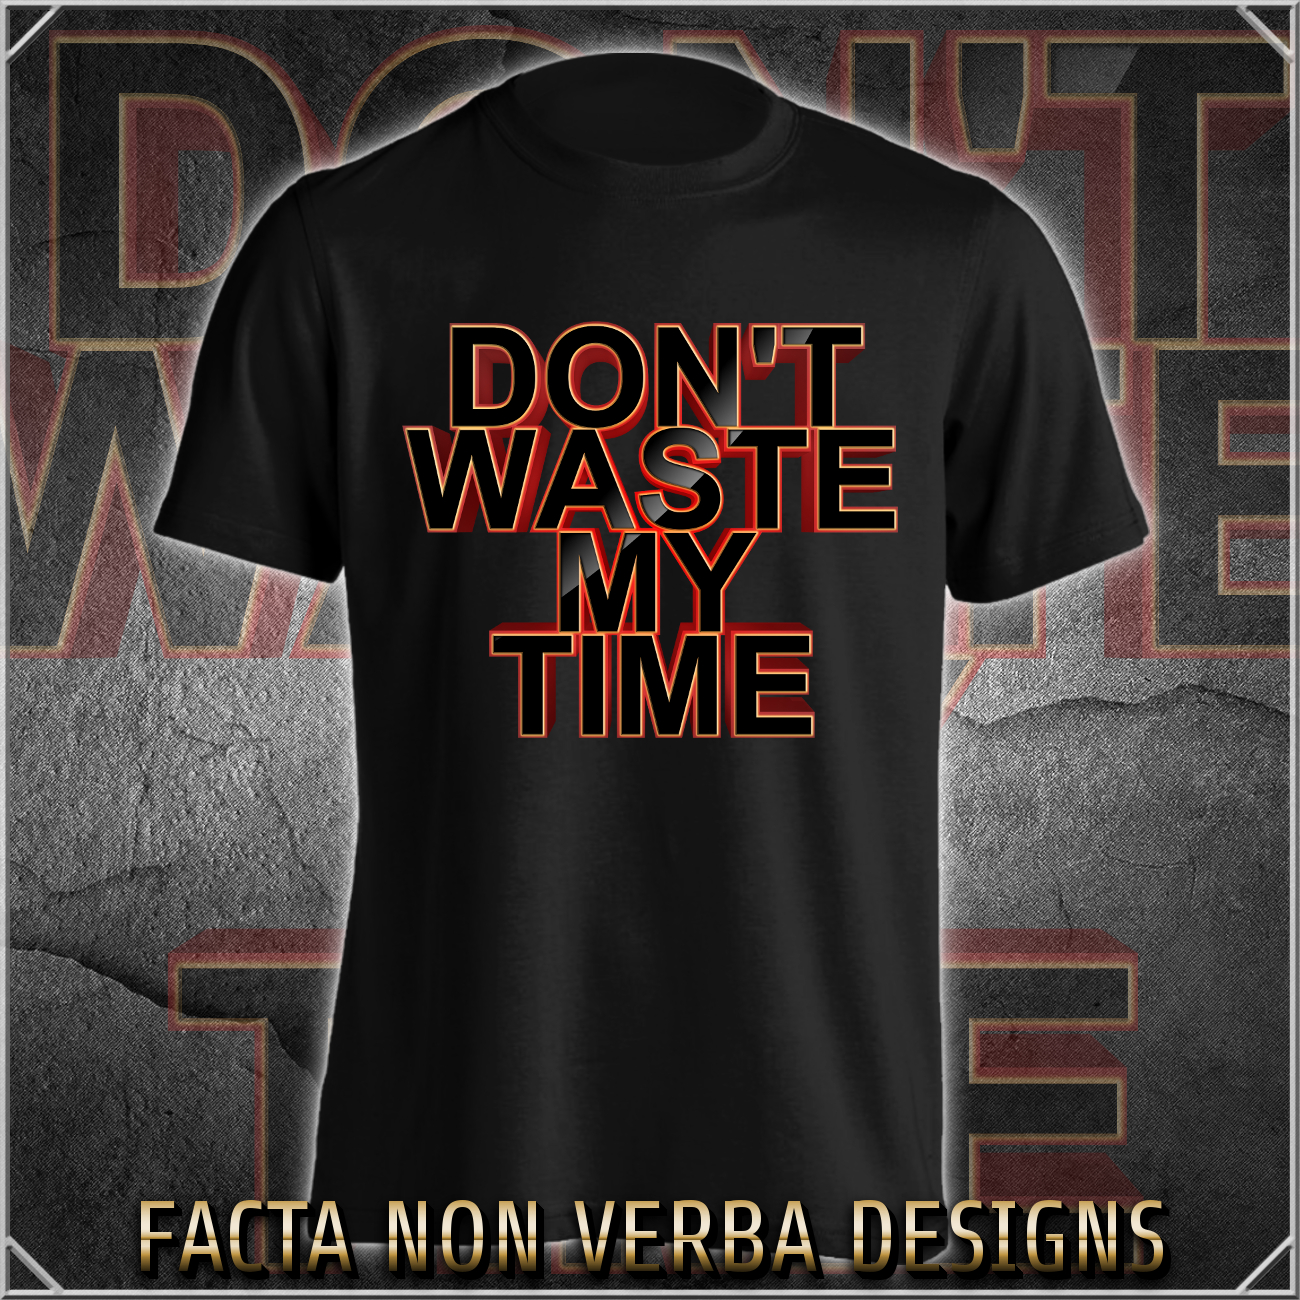 Dont waste my time 01.jpg